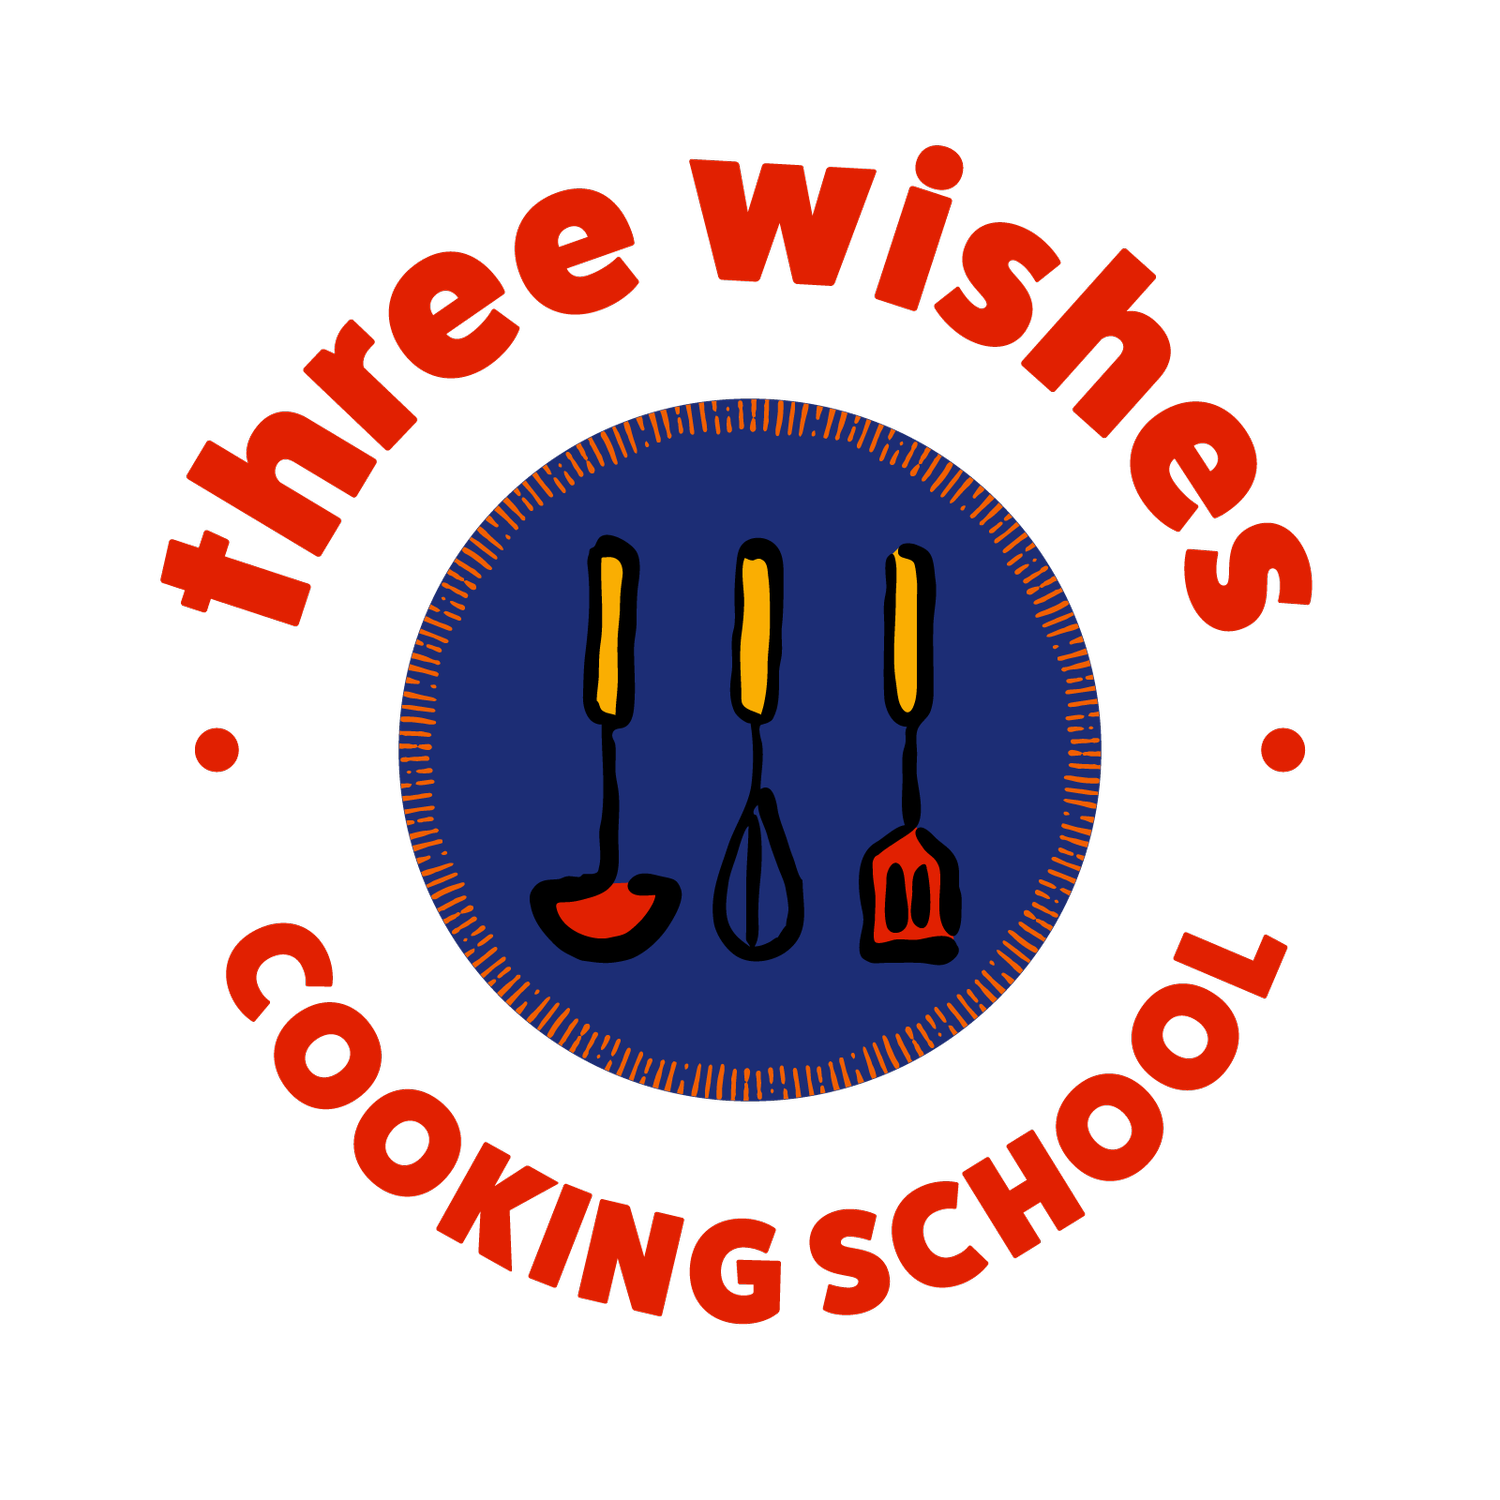 Three Wishes Cooking School